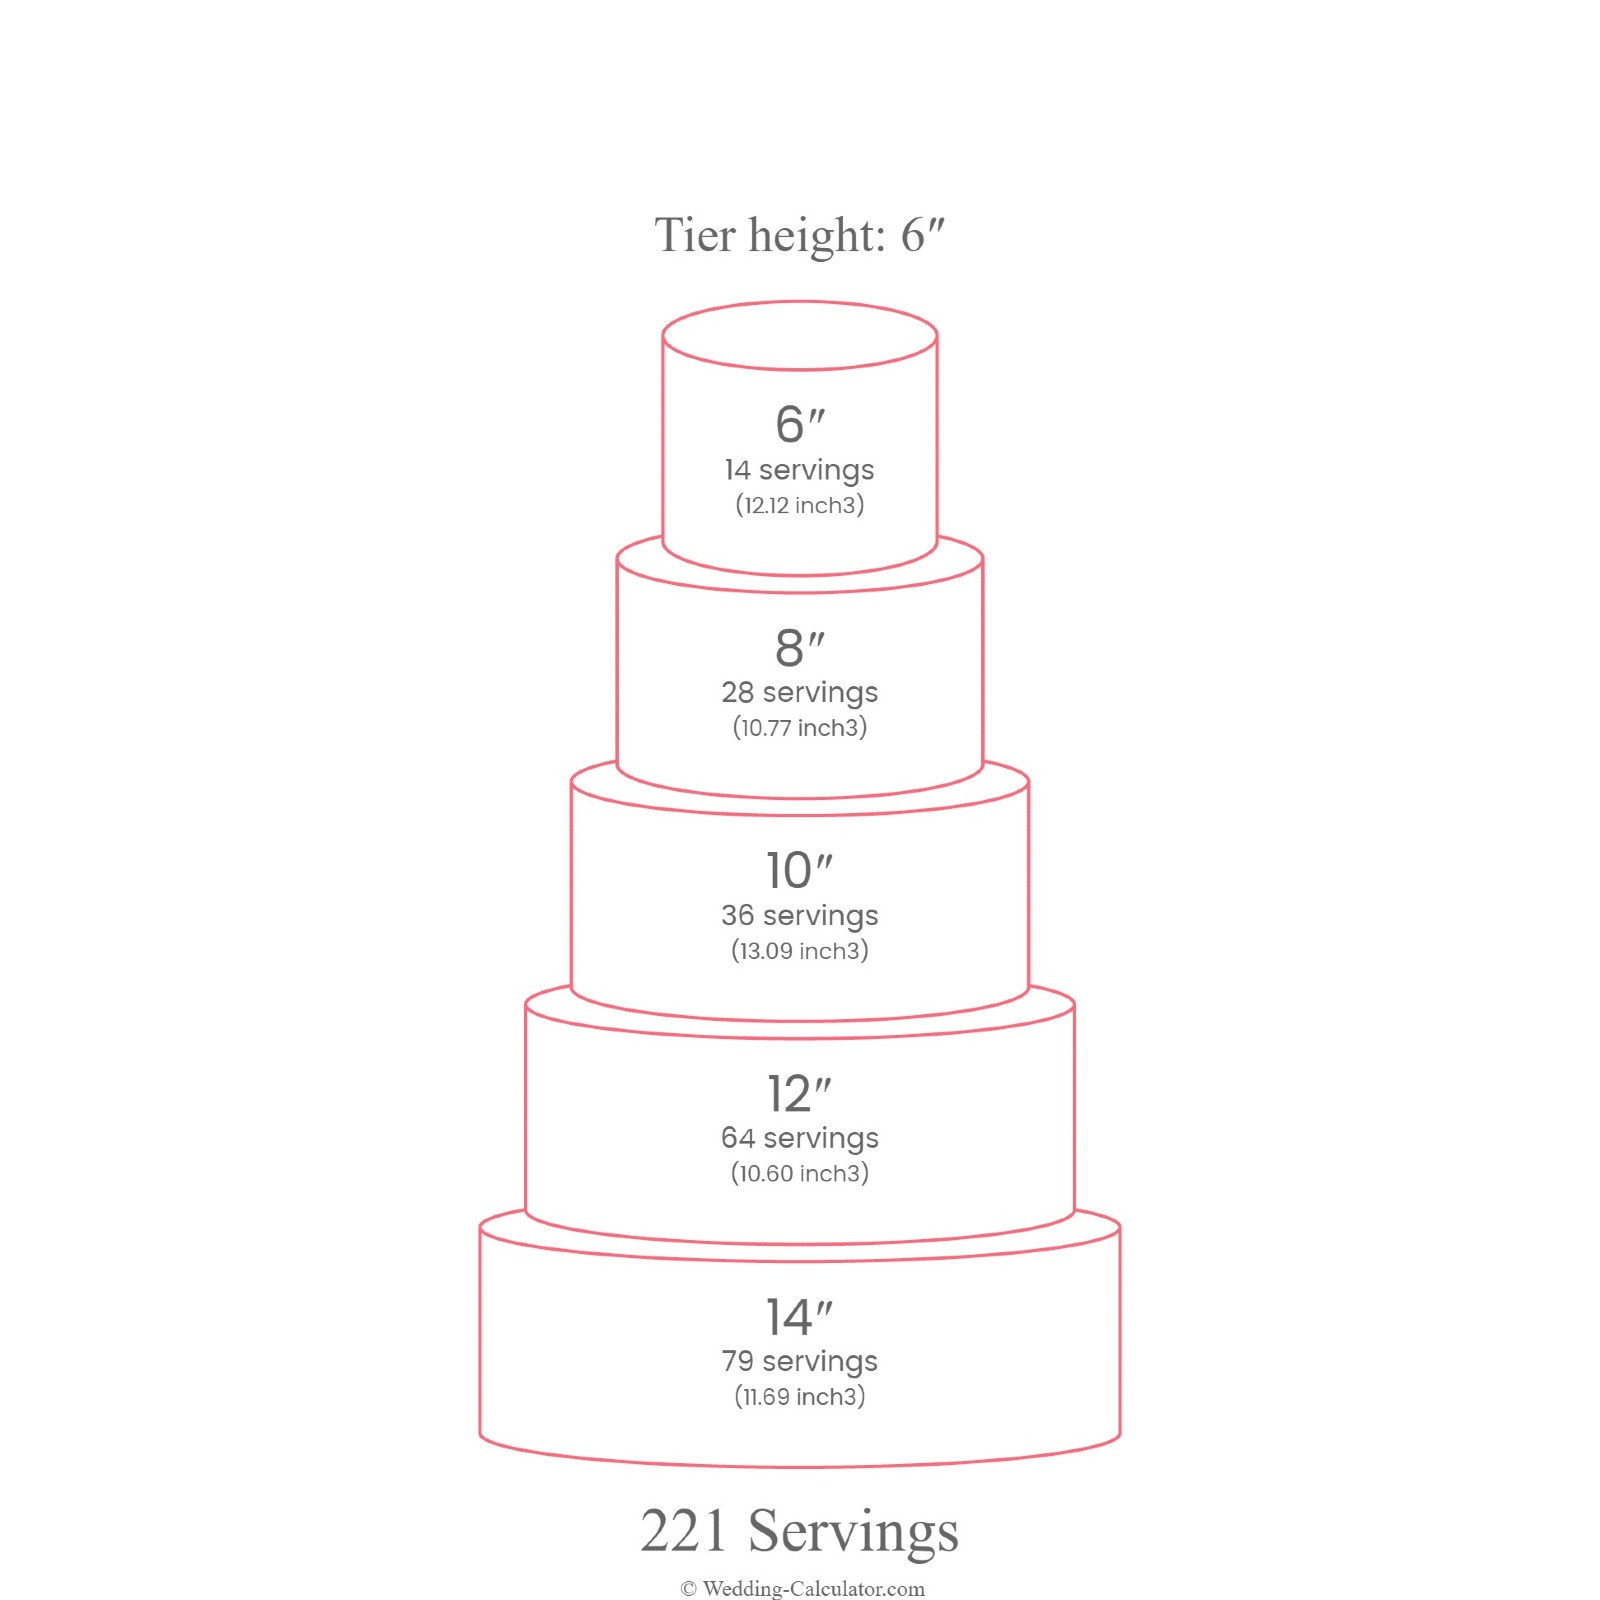 Another wedding cake size for 200 people